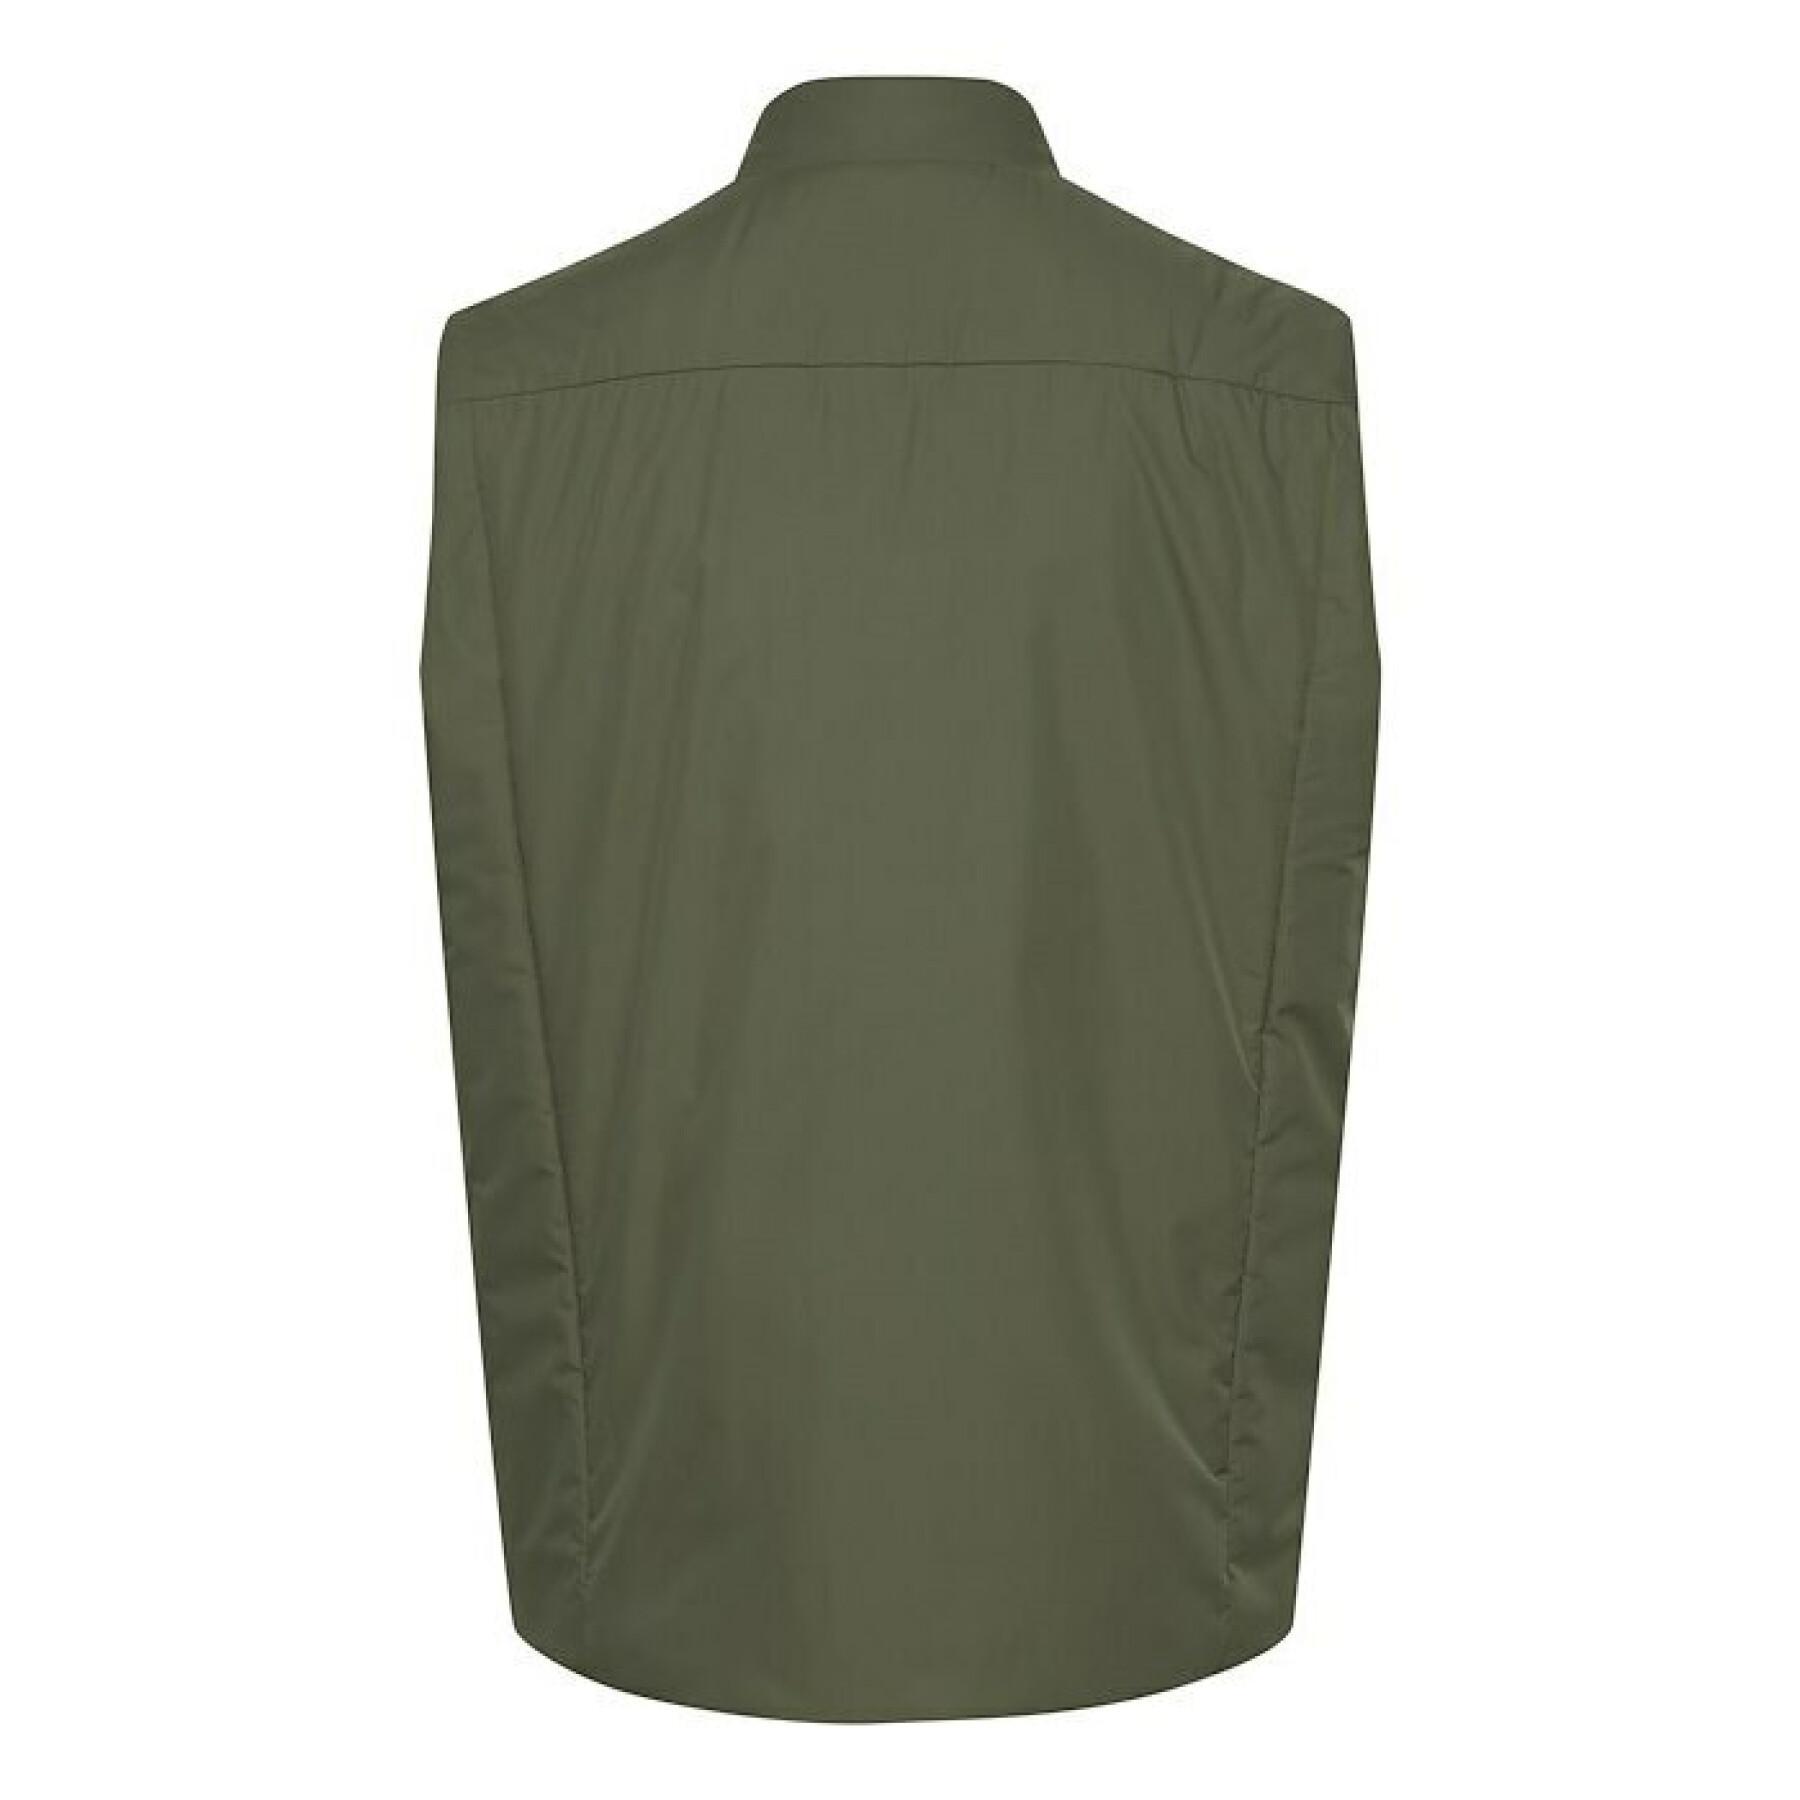 Gilet in thinsulate Casual Friday Oates - 0031